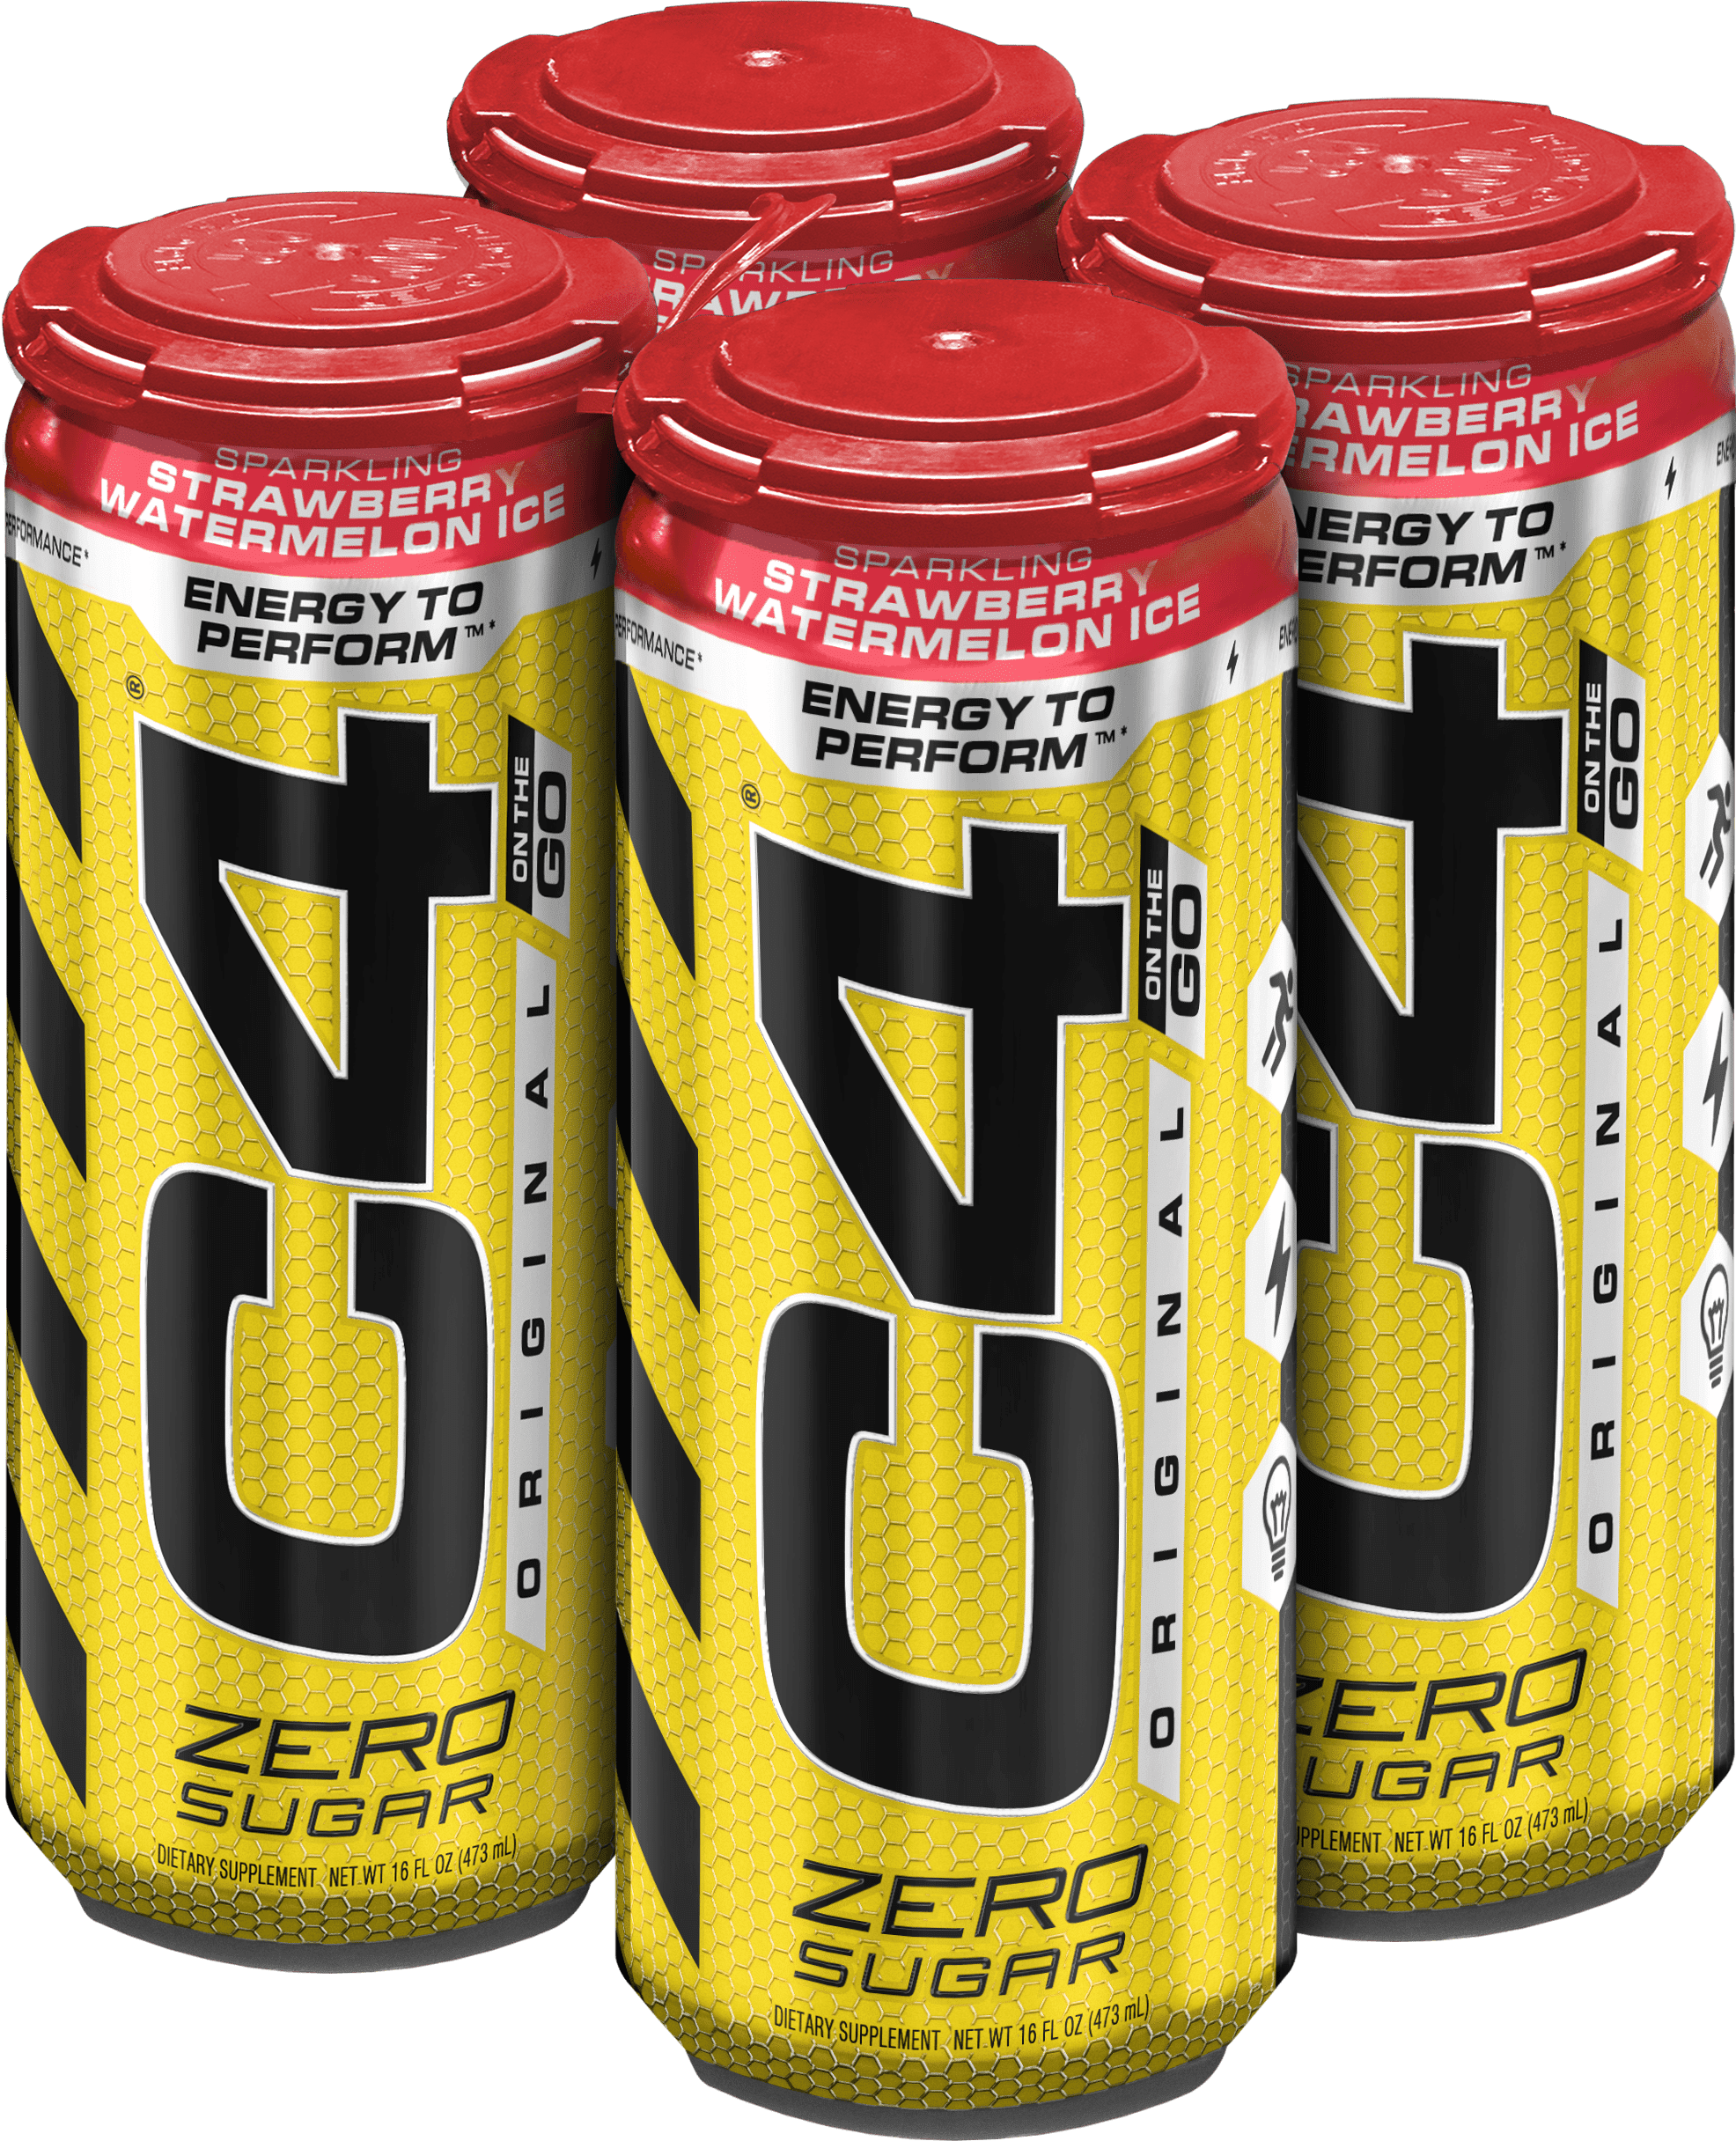 C4 Original Carbonated Pre Workout Drink Strawberry Watermelon Ice Four 16 Oz Cans